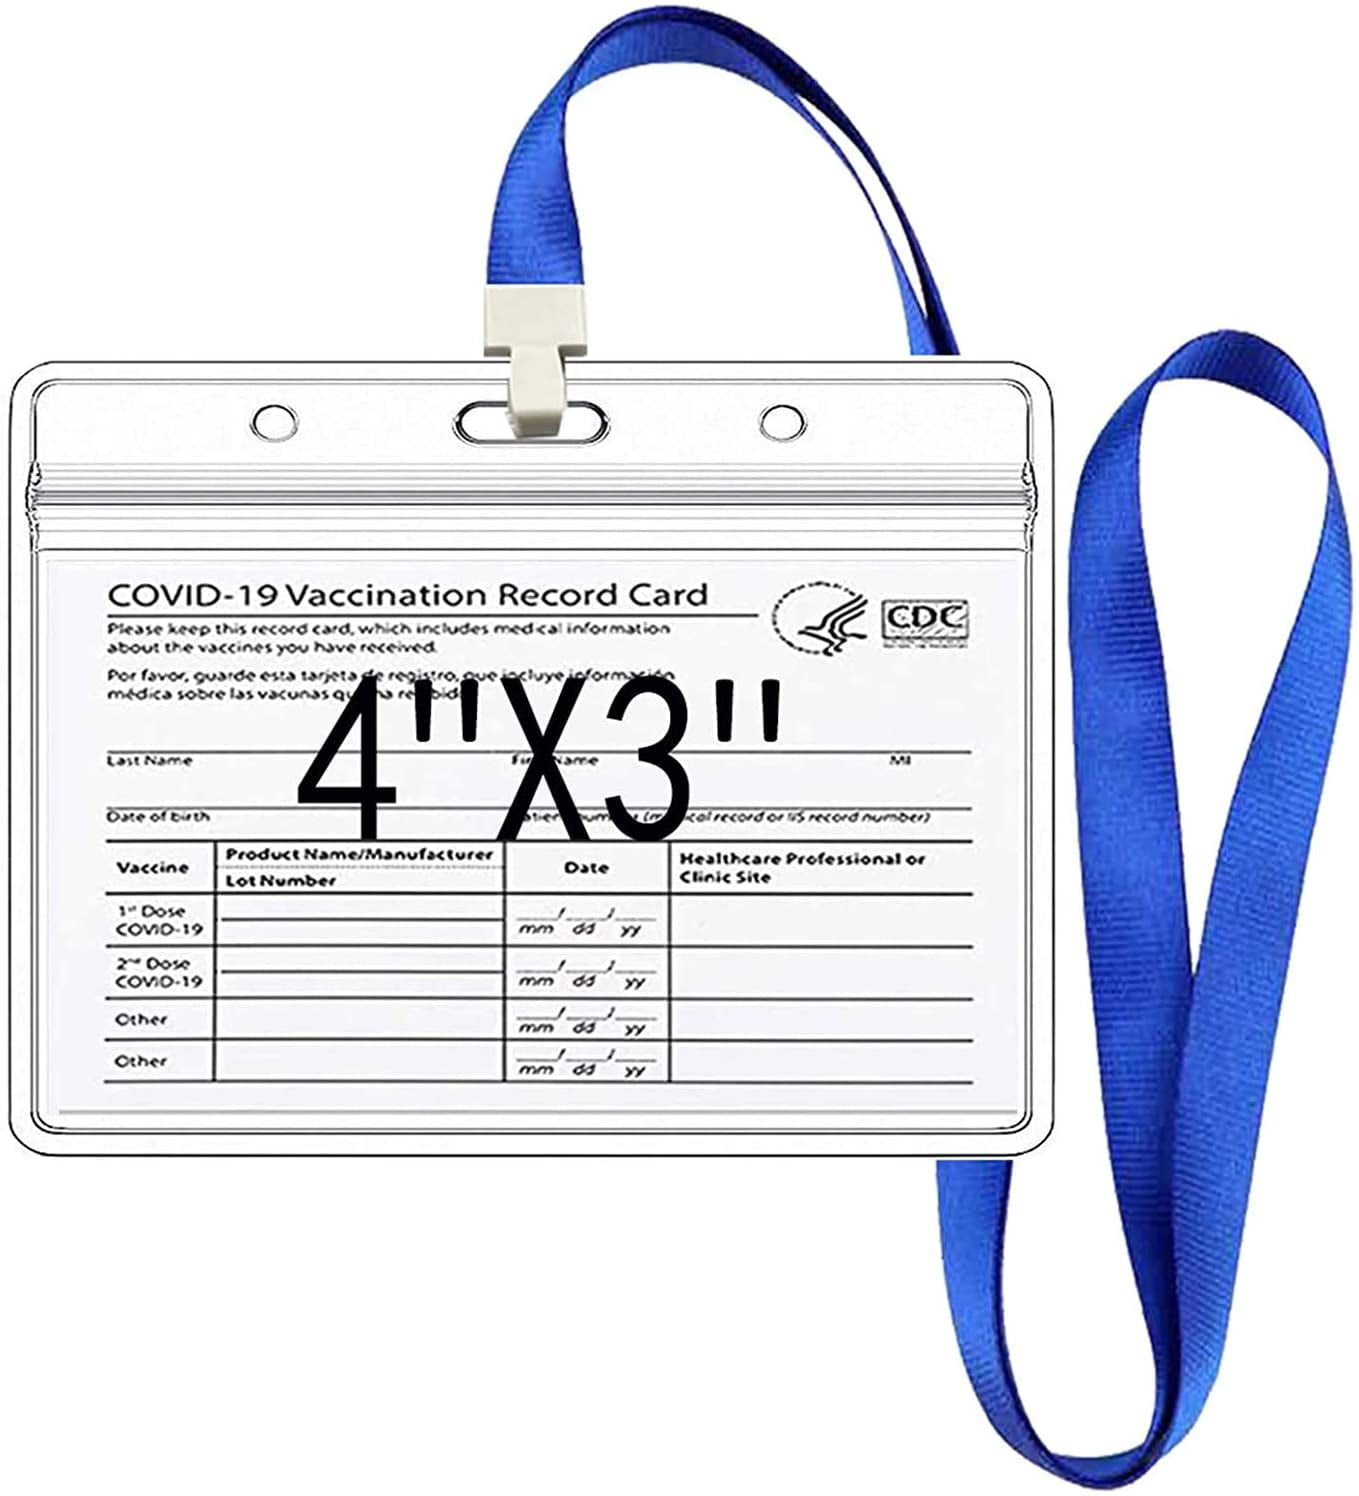 5 Pcs + 5 Blue Lanyards ID Badge Card Holder/Double-Sided Card Holder/Card Protector Sleeve Case/Name Card Badge Holder with Lanyard/Card Holder Protector Sleeves for School Business Office 